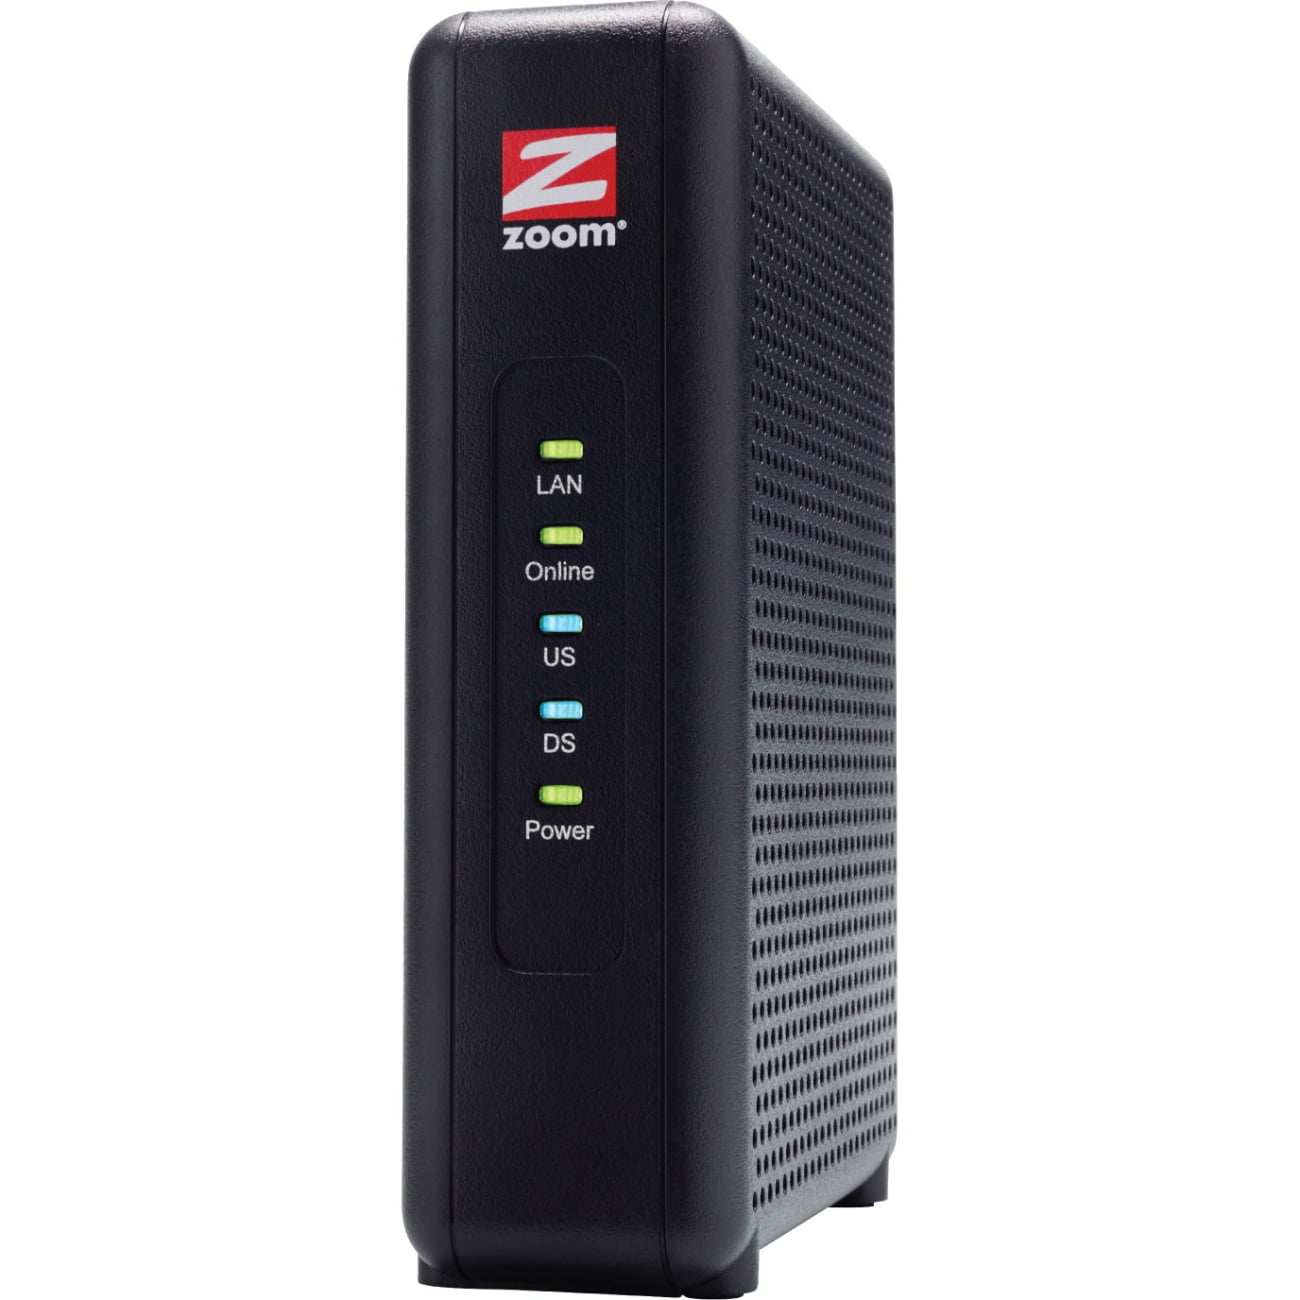 Zoom 8x4 Cable Modem, 343 Mbps DOCSIS 3.0, Model 5345, Certified by Comcast XFINITY, Charter Spectrum, Time Warner Cable and Other Service Providers